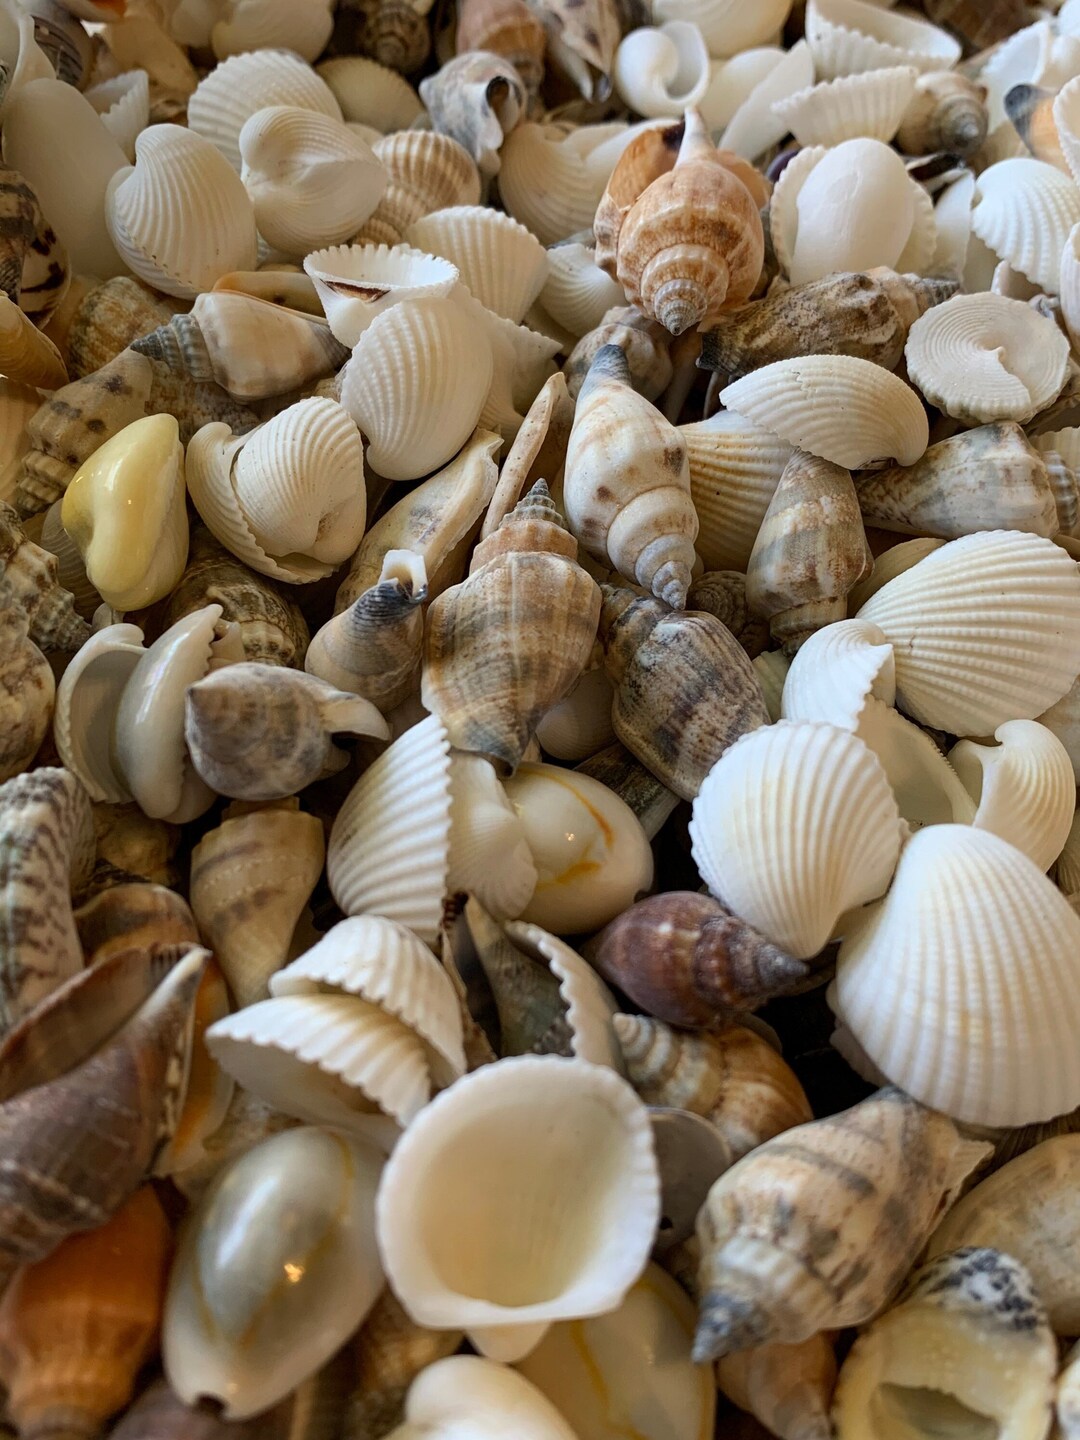 Premium Tiny Seashell Mix, Including Sea Shells, Sea Snails and Starfish  Total 300+PCS (8 Kinds), Shells for Crafts Decorating Resin and Mosaics